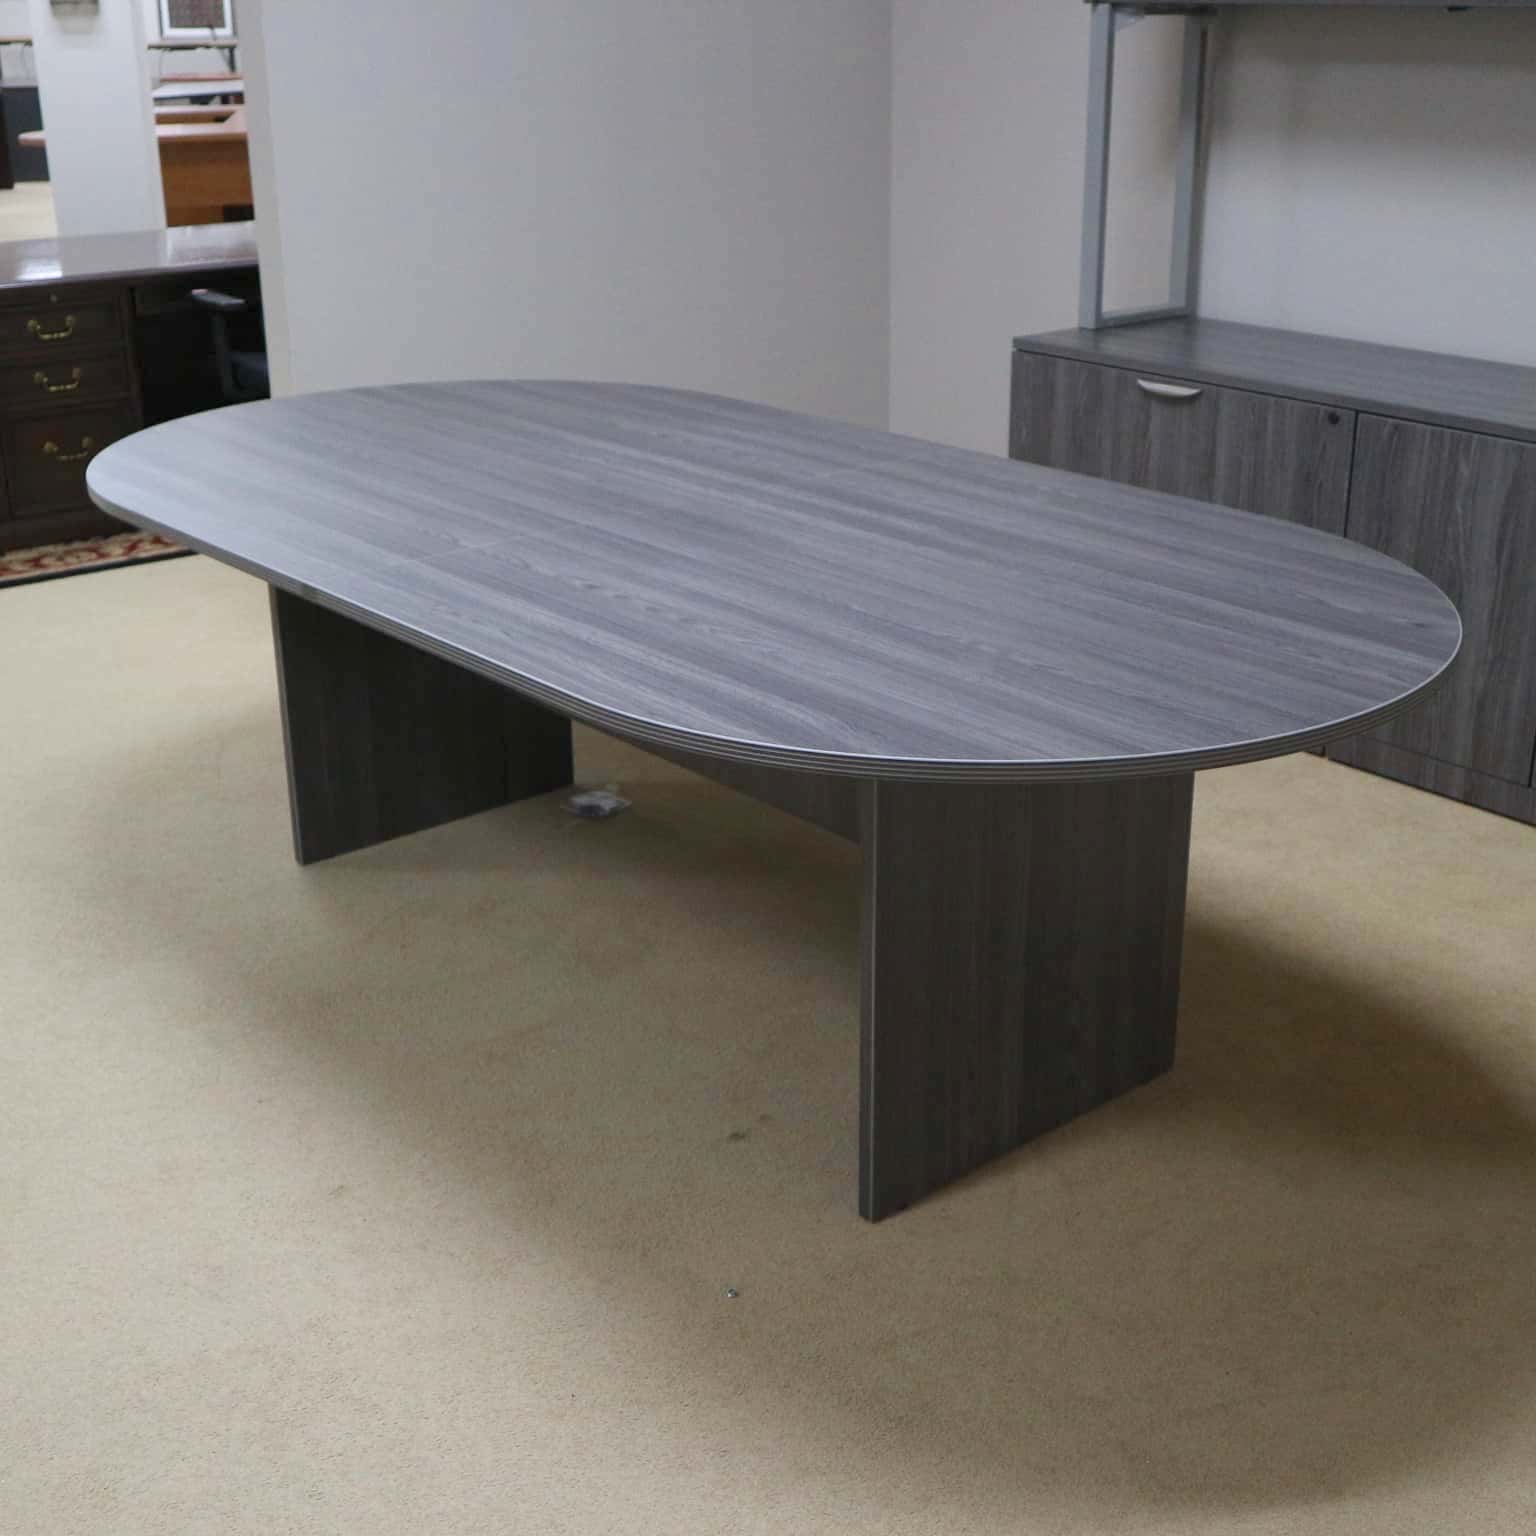 Conference Table 8 x4